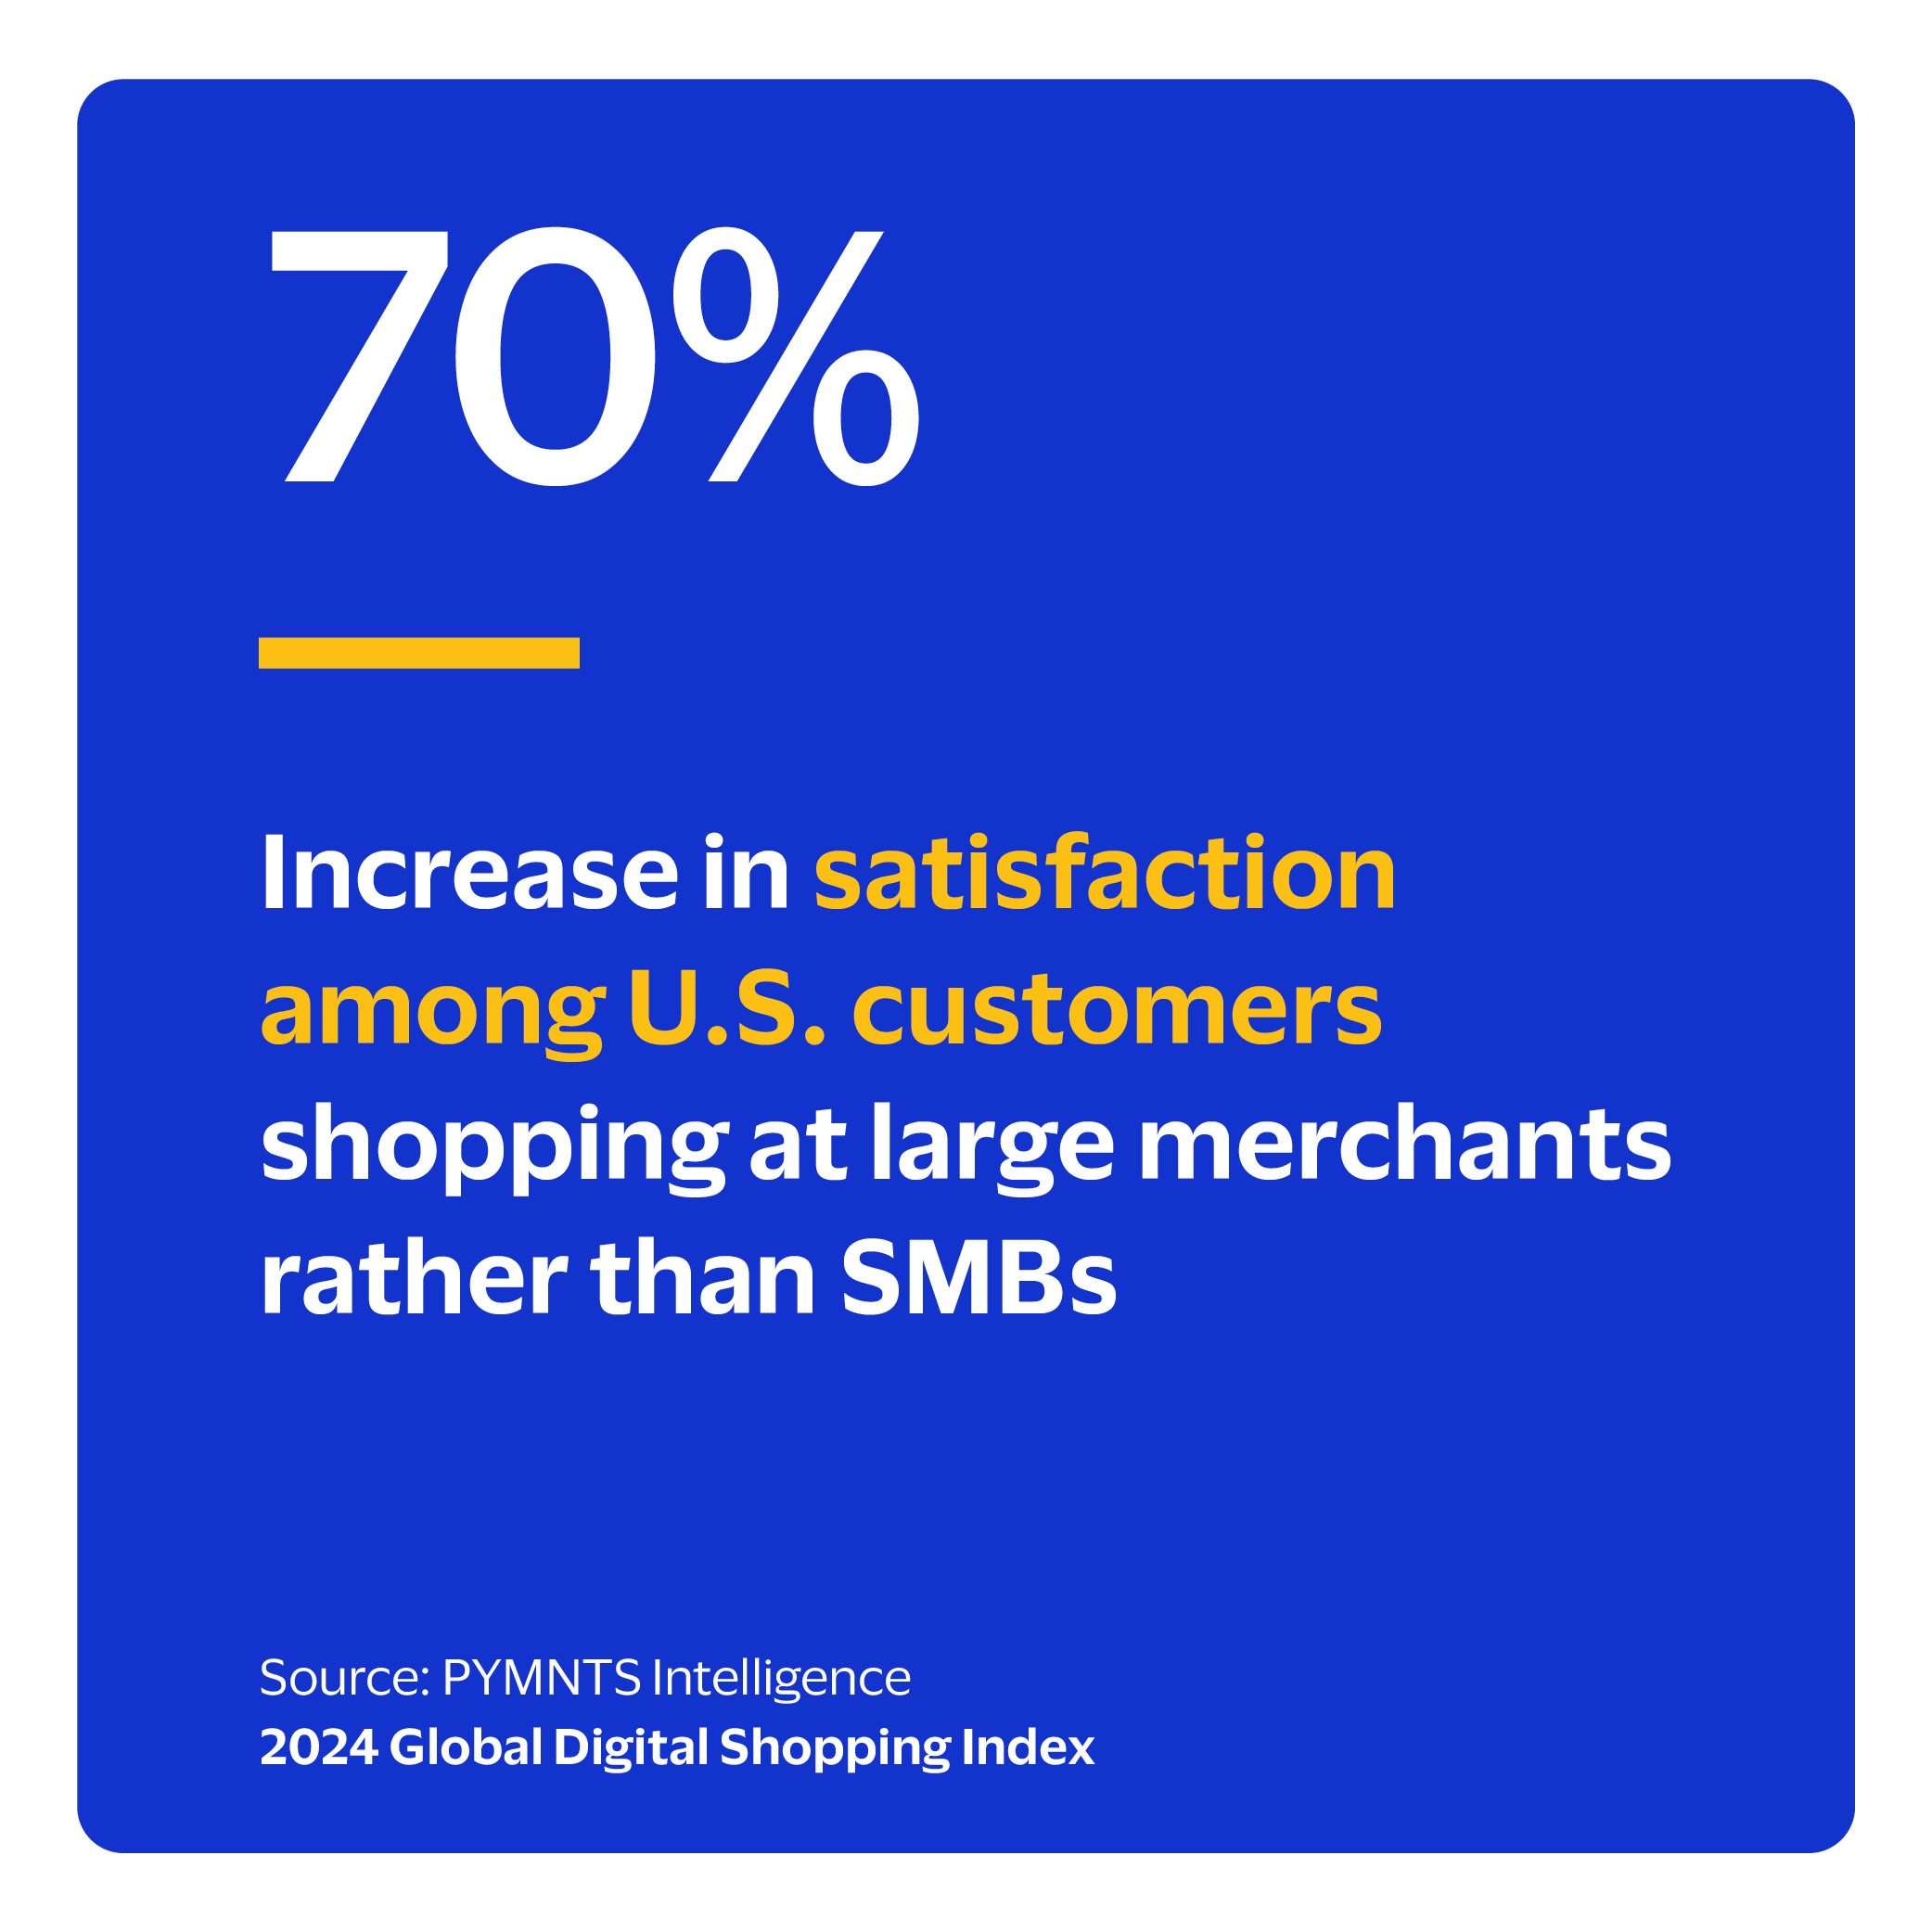  Increase in satisfaction among U.S. customers shopping at large merchants rather than SMBs